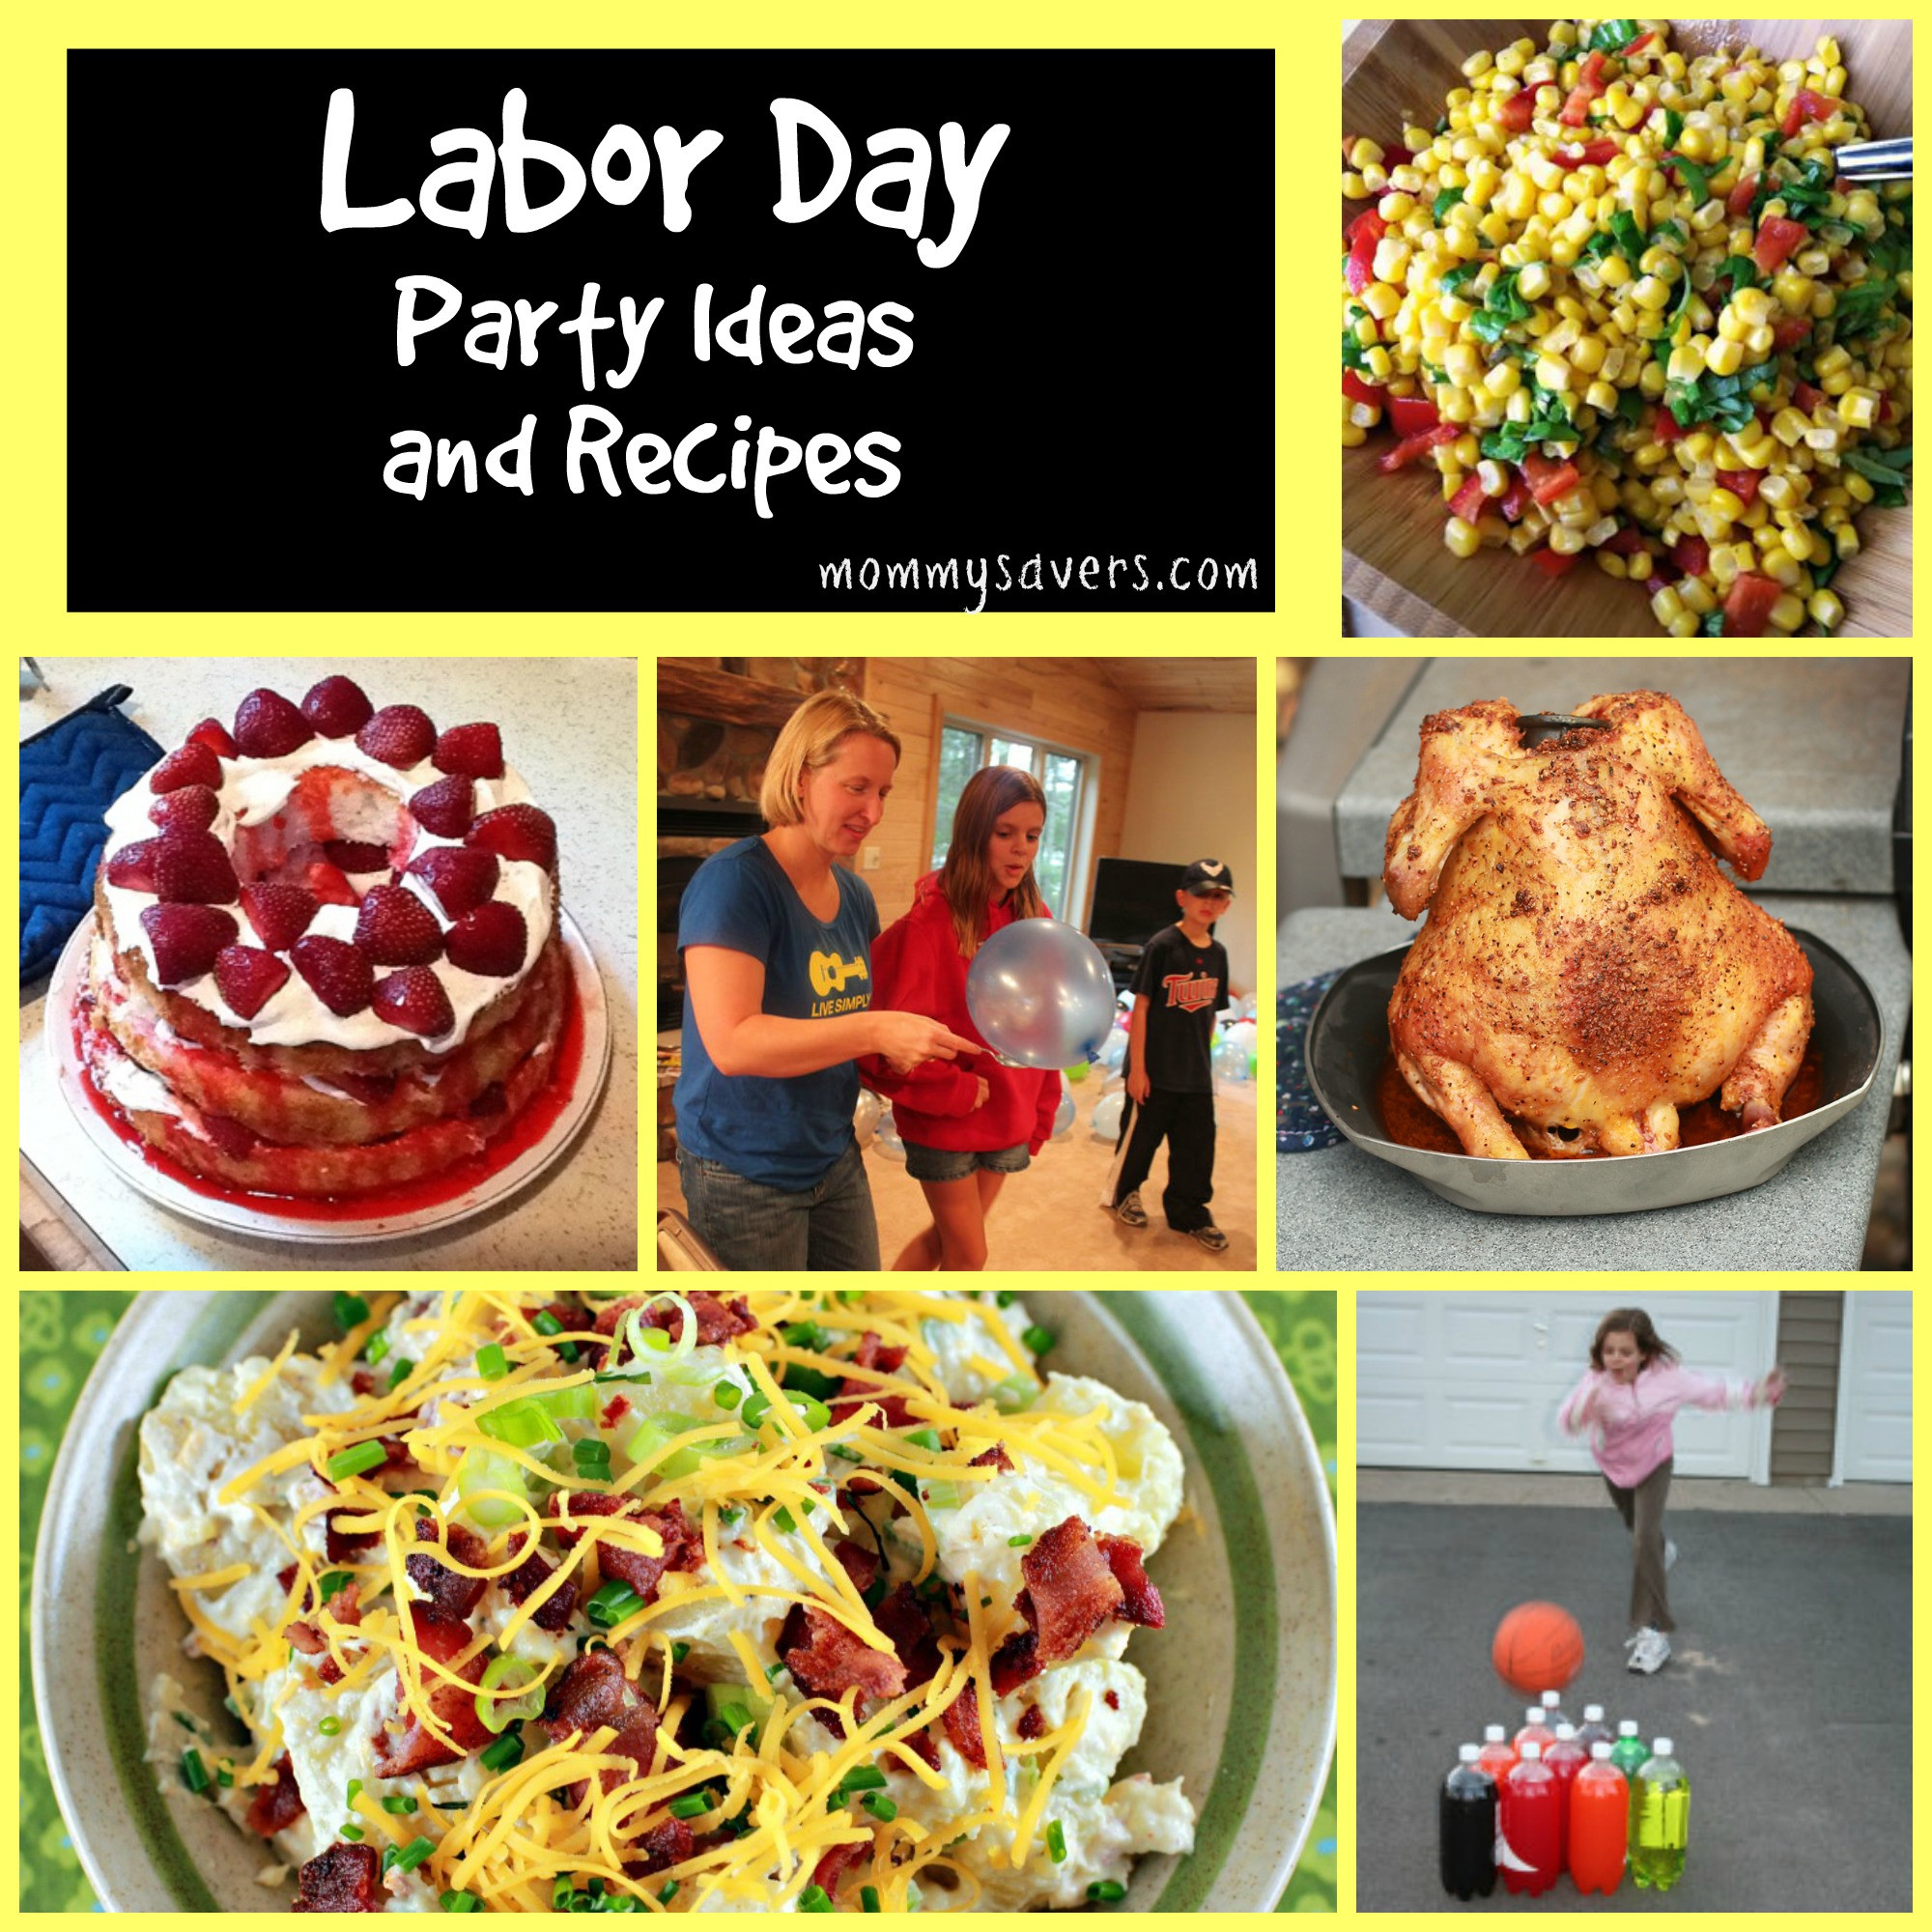 Labor Day Party Food
 Labor Day Party Ideas and 25 Recipes Mommysavers